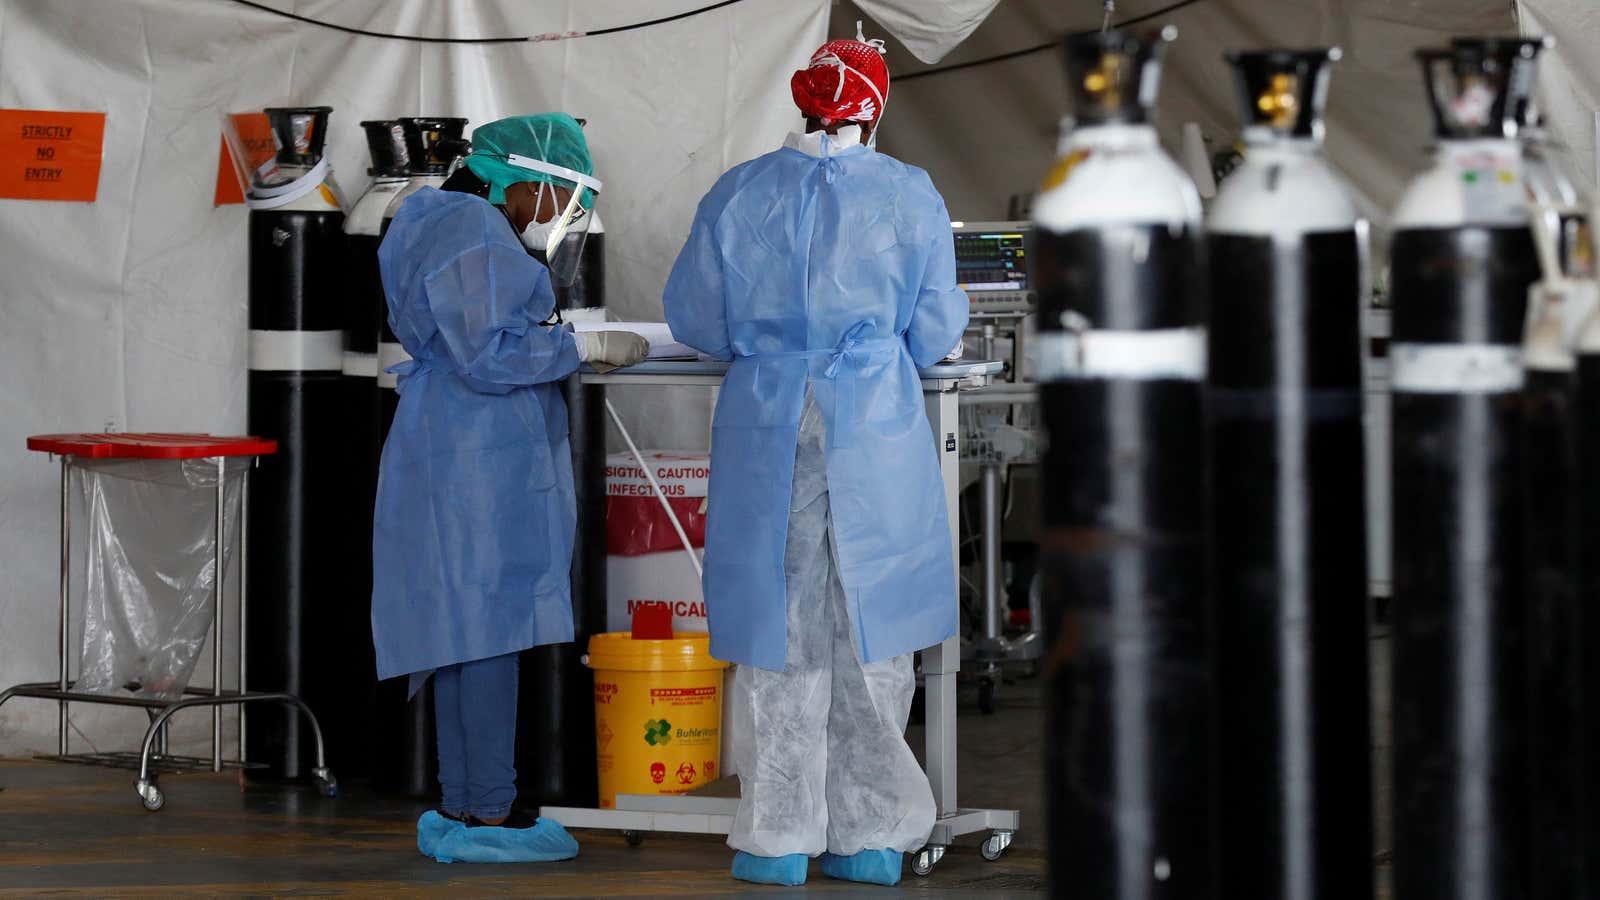 Healthcare workers stand beside empty oxygen tanks at a temporary ward set up for Covid-19 patients at Steve Biko Academic Hospital in Pretoria, South Africa, Jan. 19, 2021.